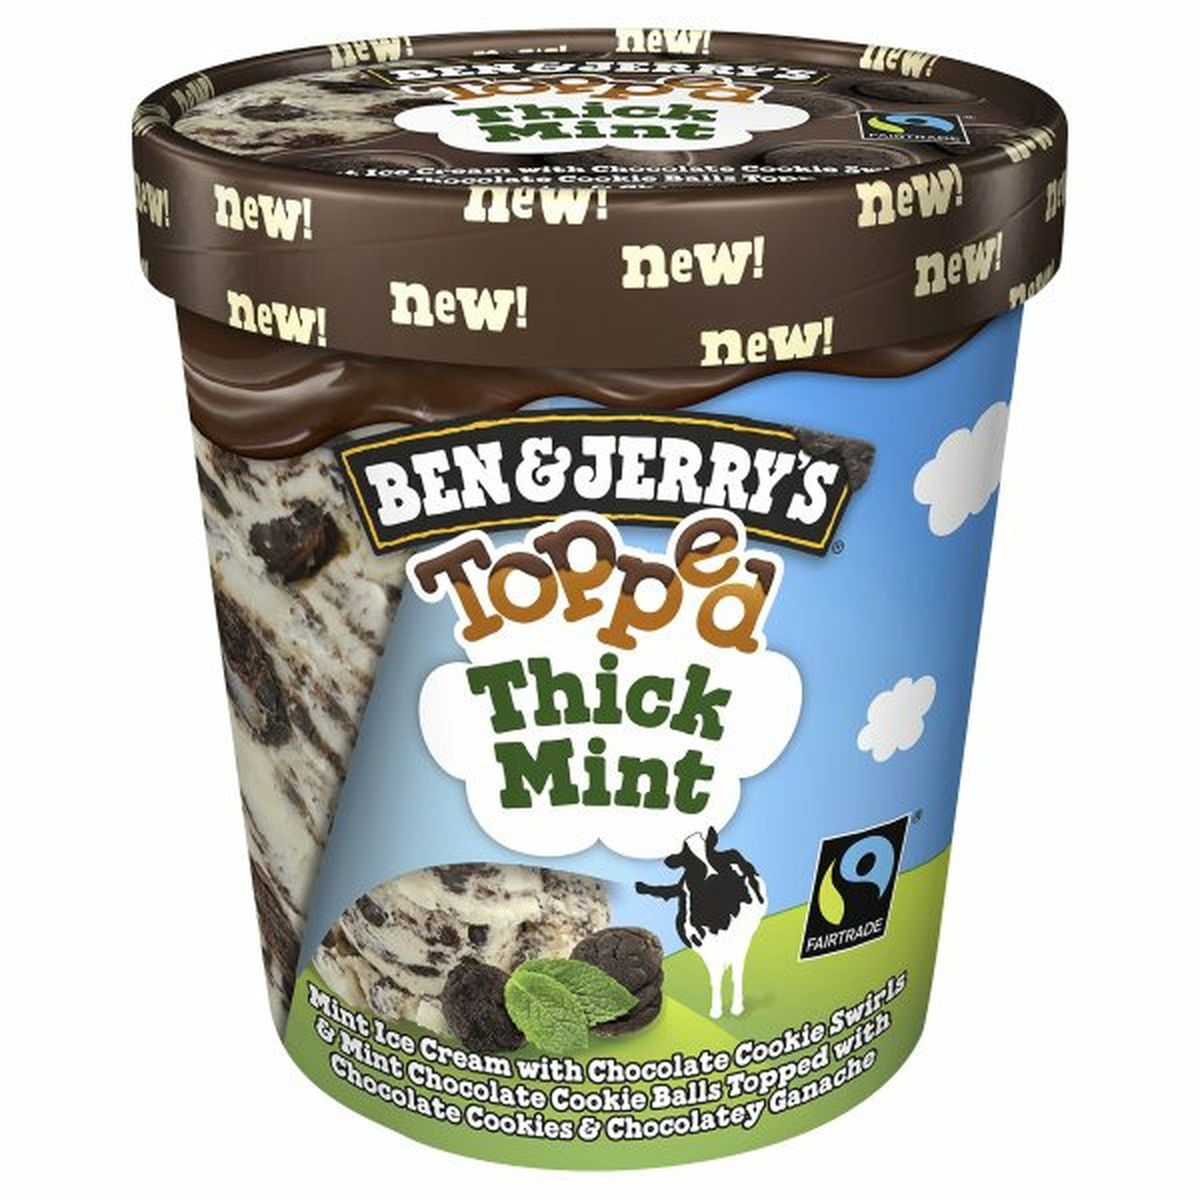 Calories in Ben & Jerry's Topped Ice Cream, Thick Mint